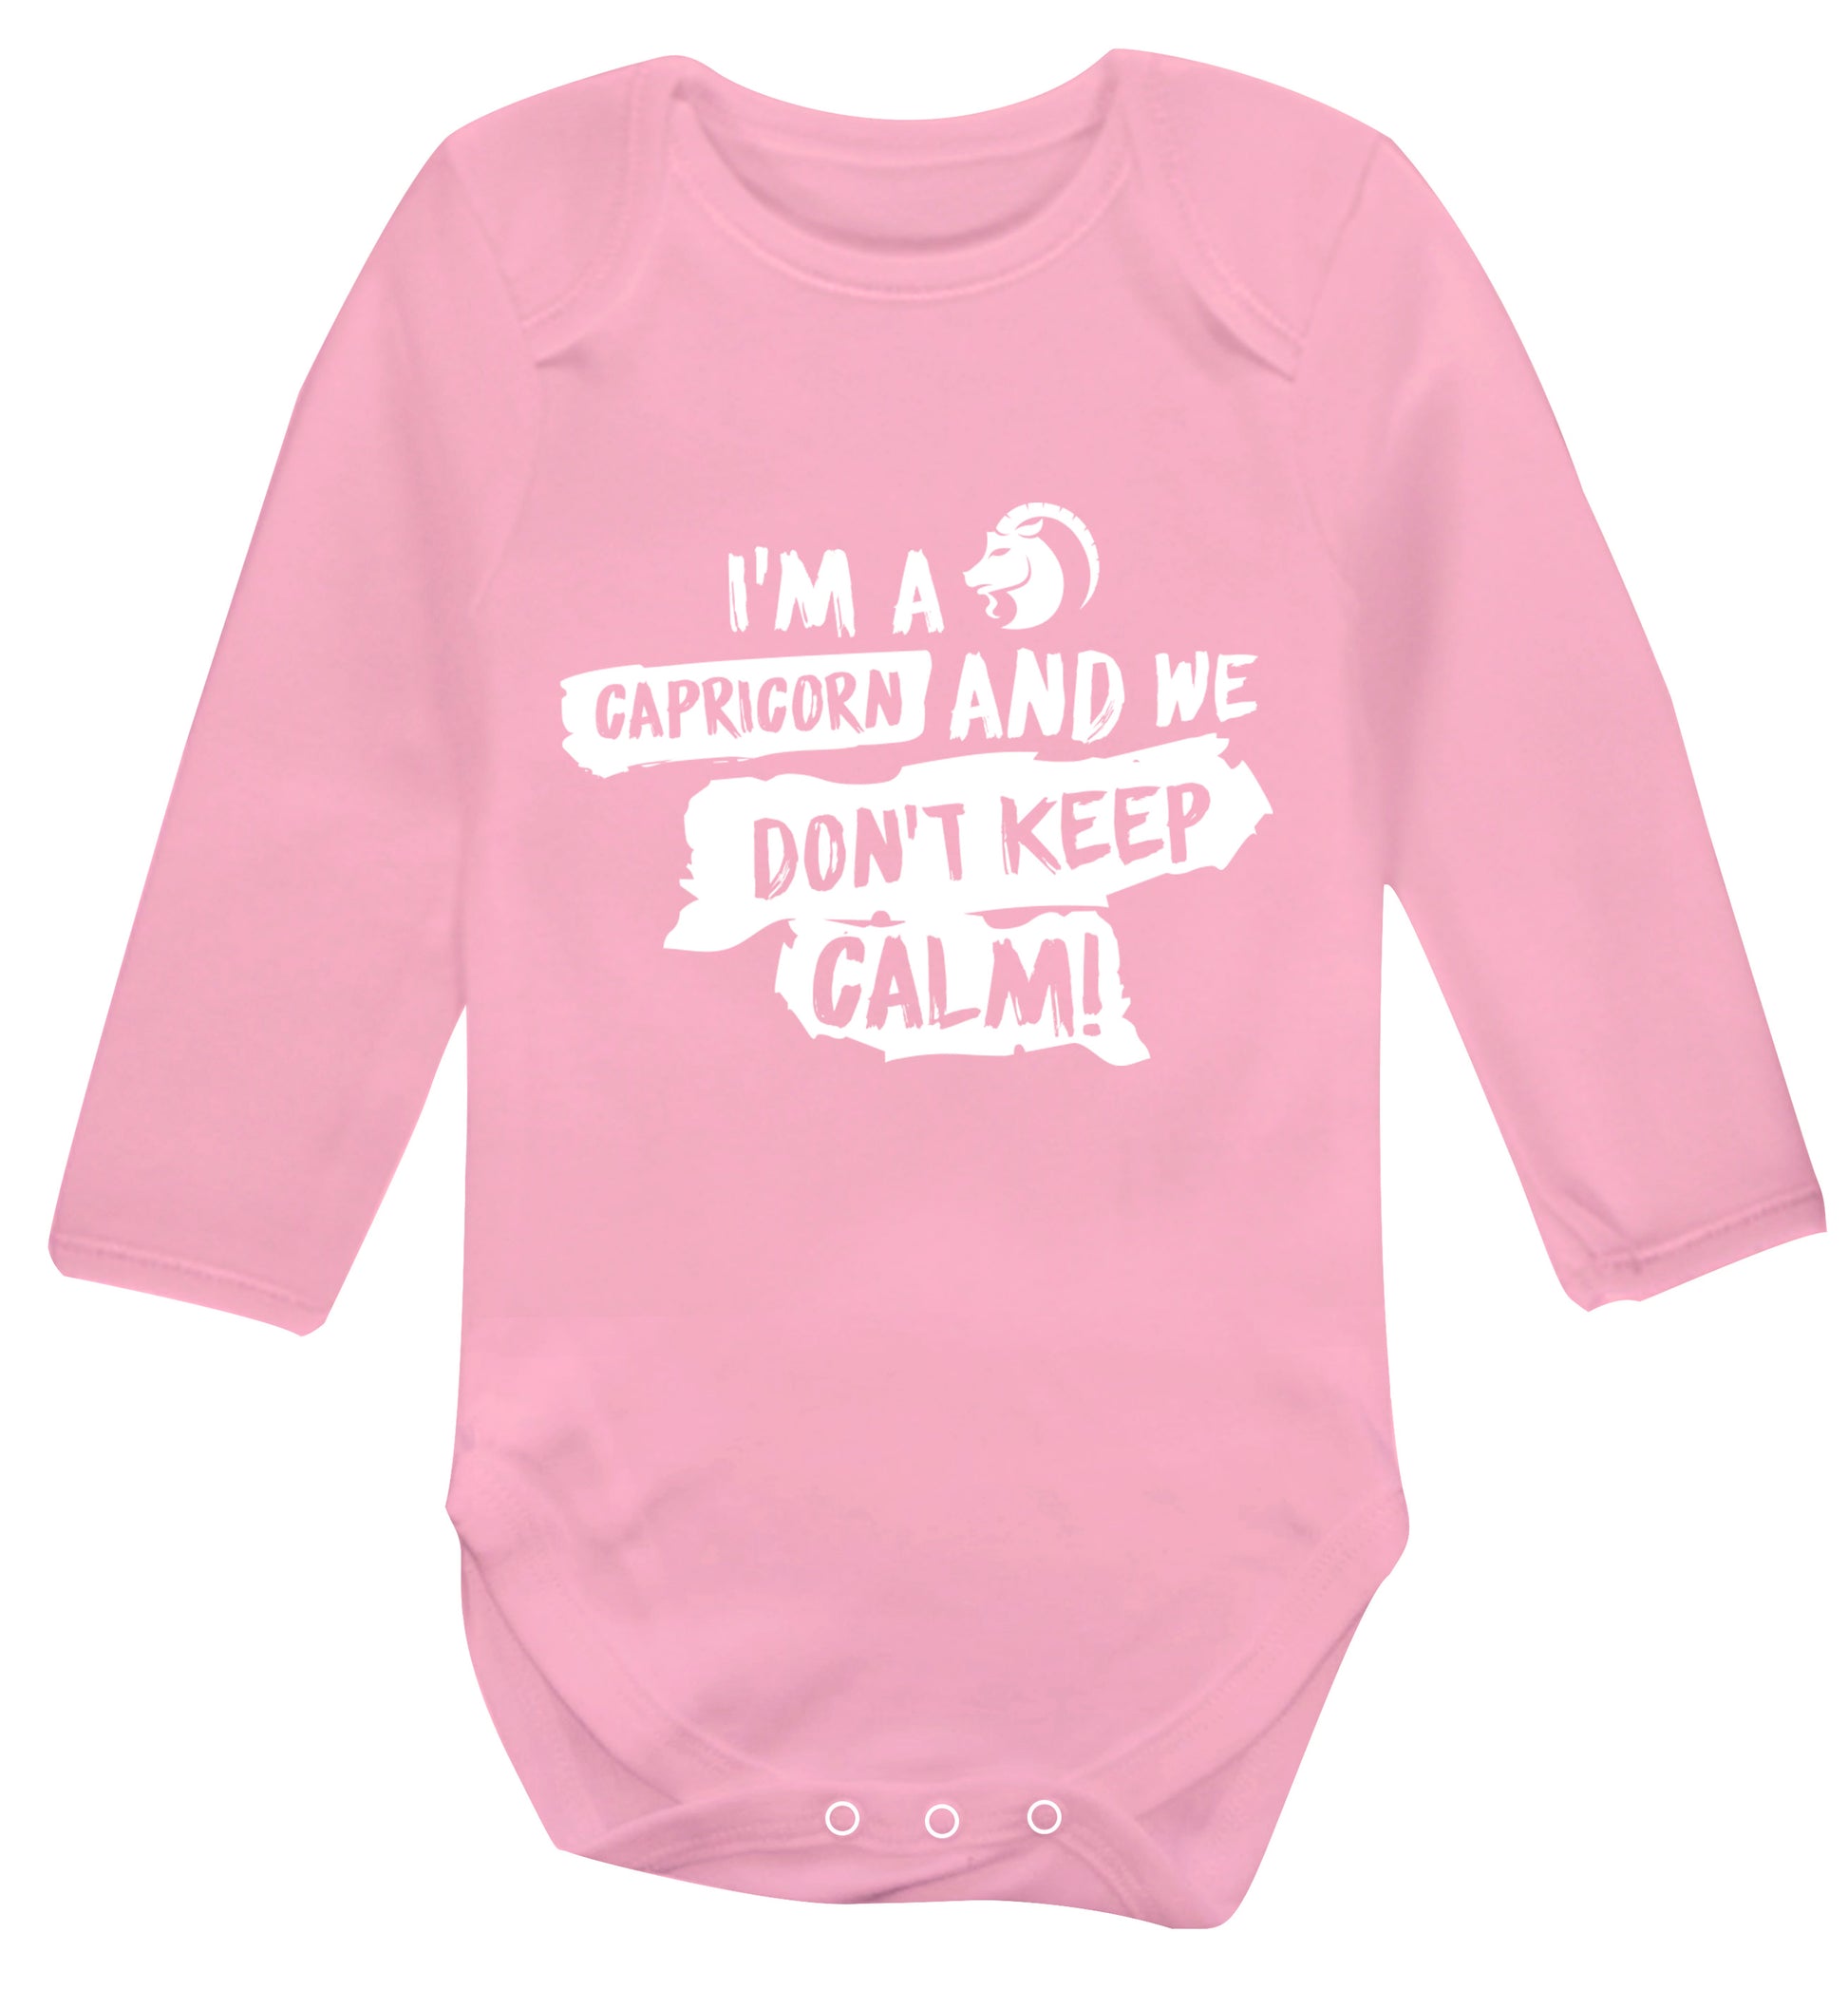 I'm a capricorn and we don't keep calm Baby Vest long sleeved pale pink 6-12 months